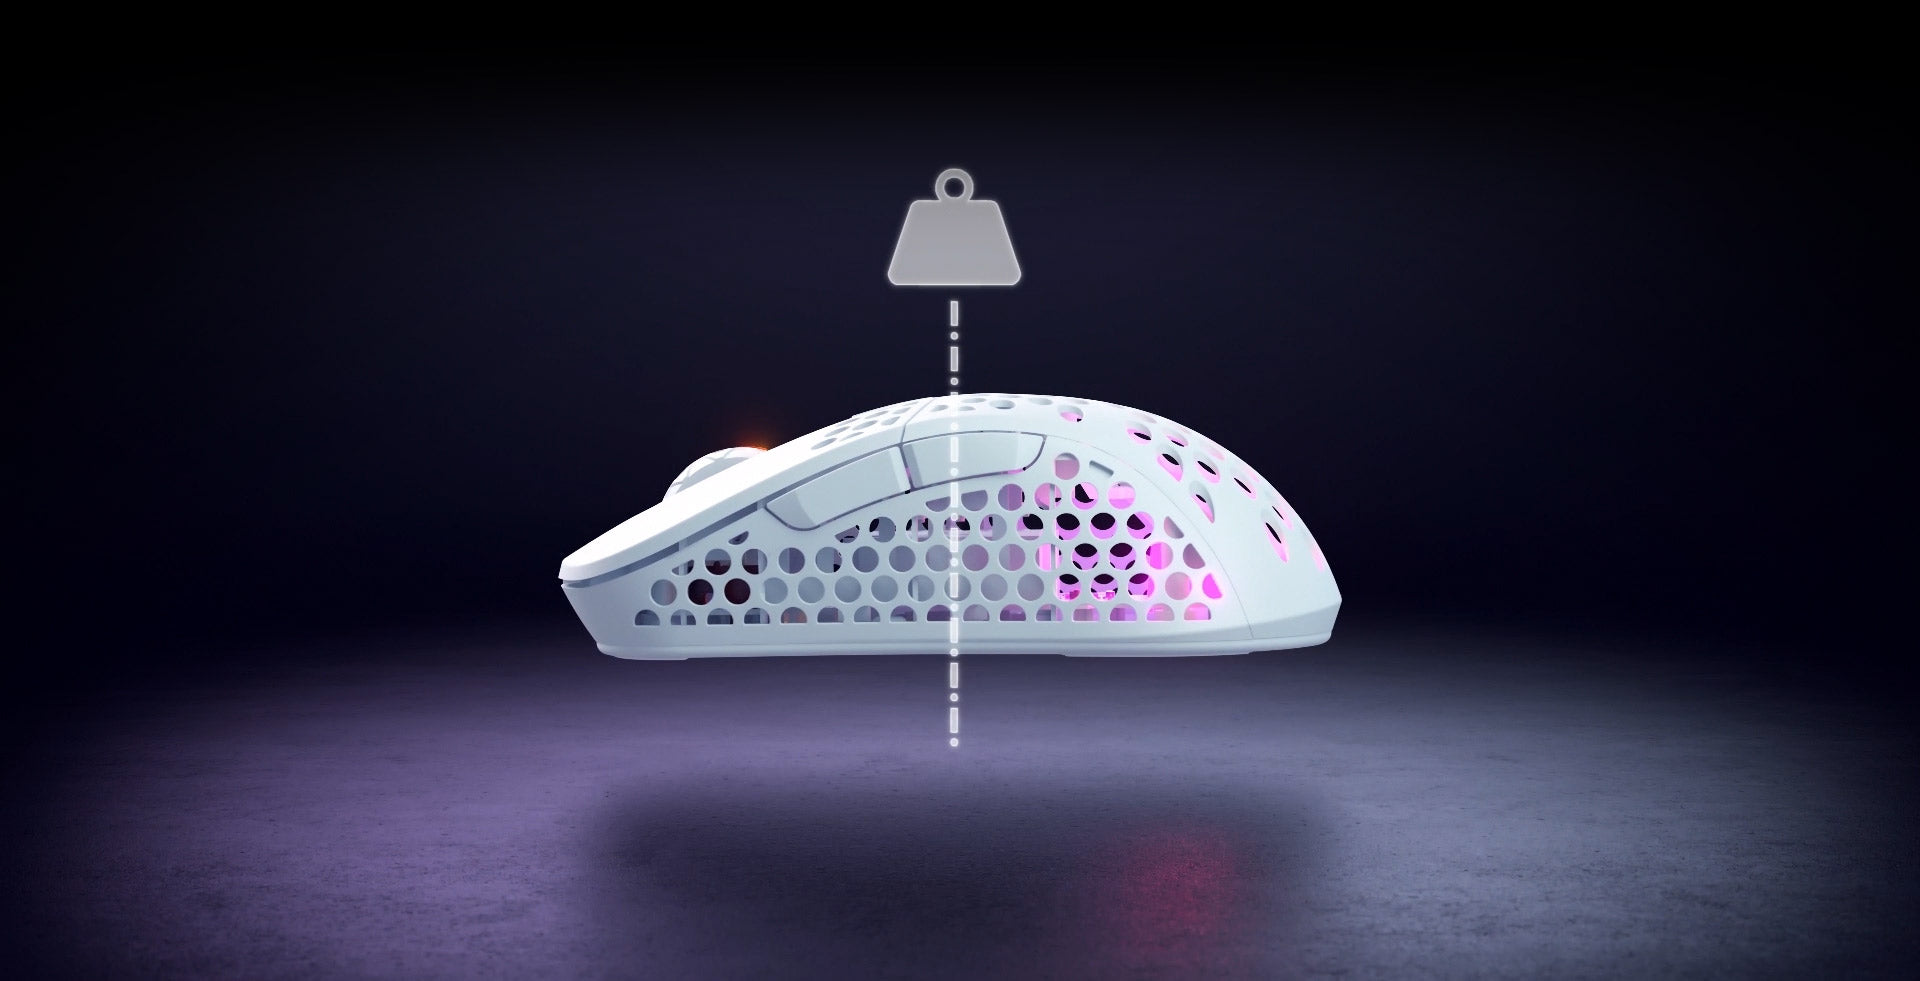 Xtrfy M4 Wireless Ultra-light White Gaming Mouse